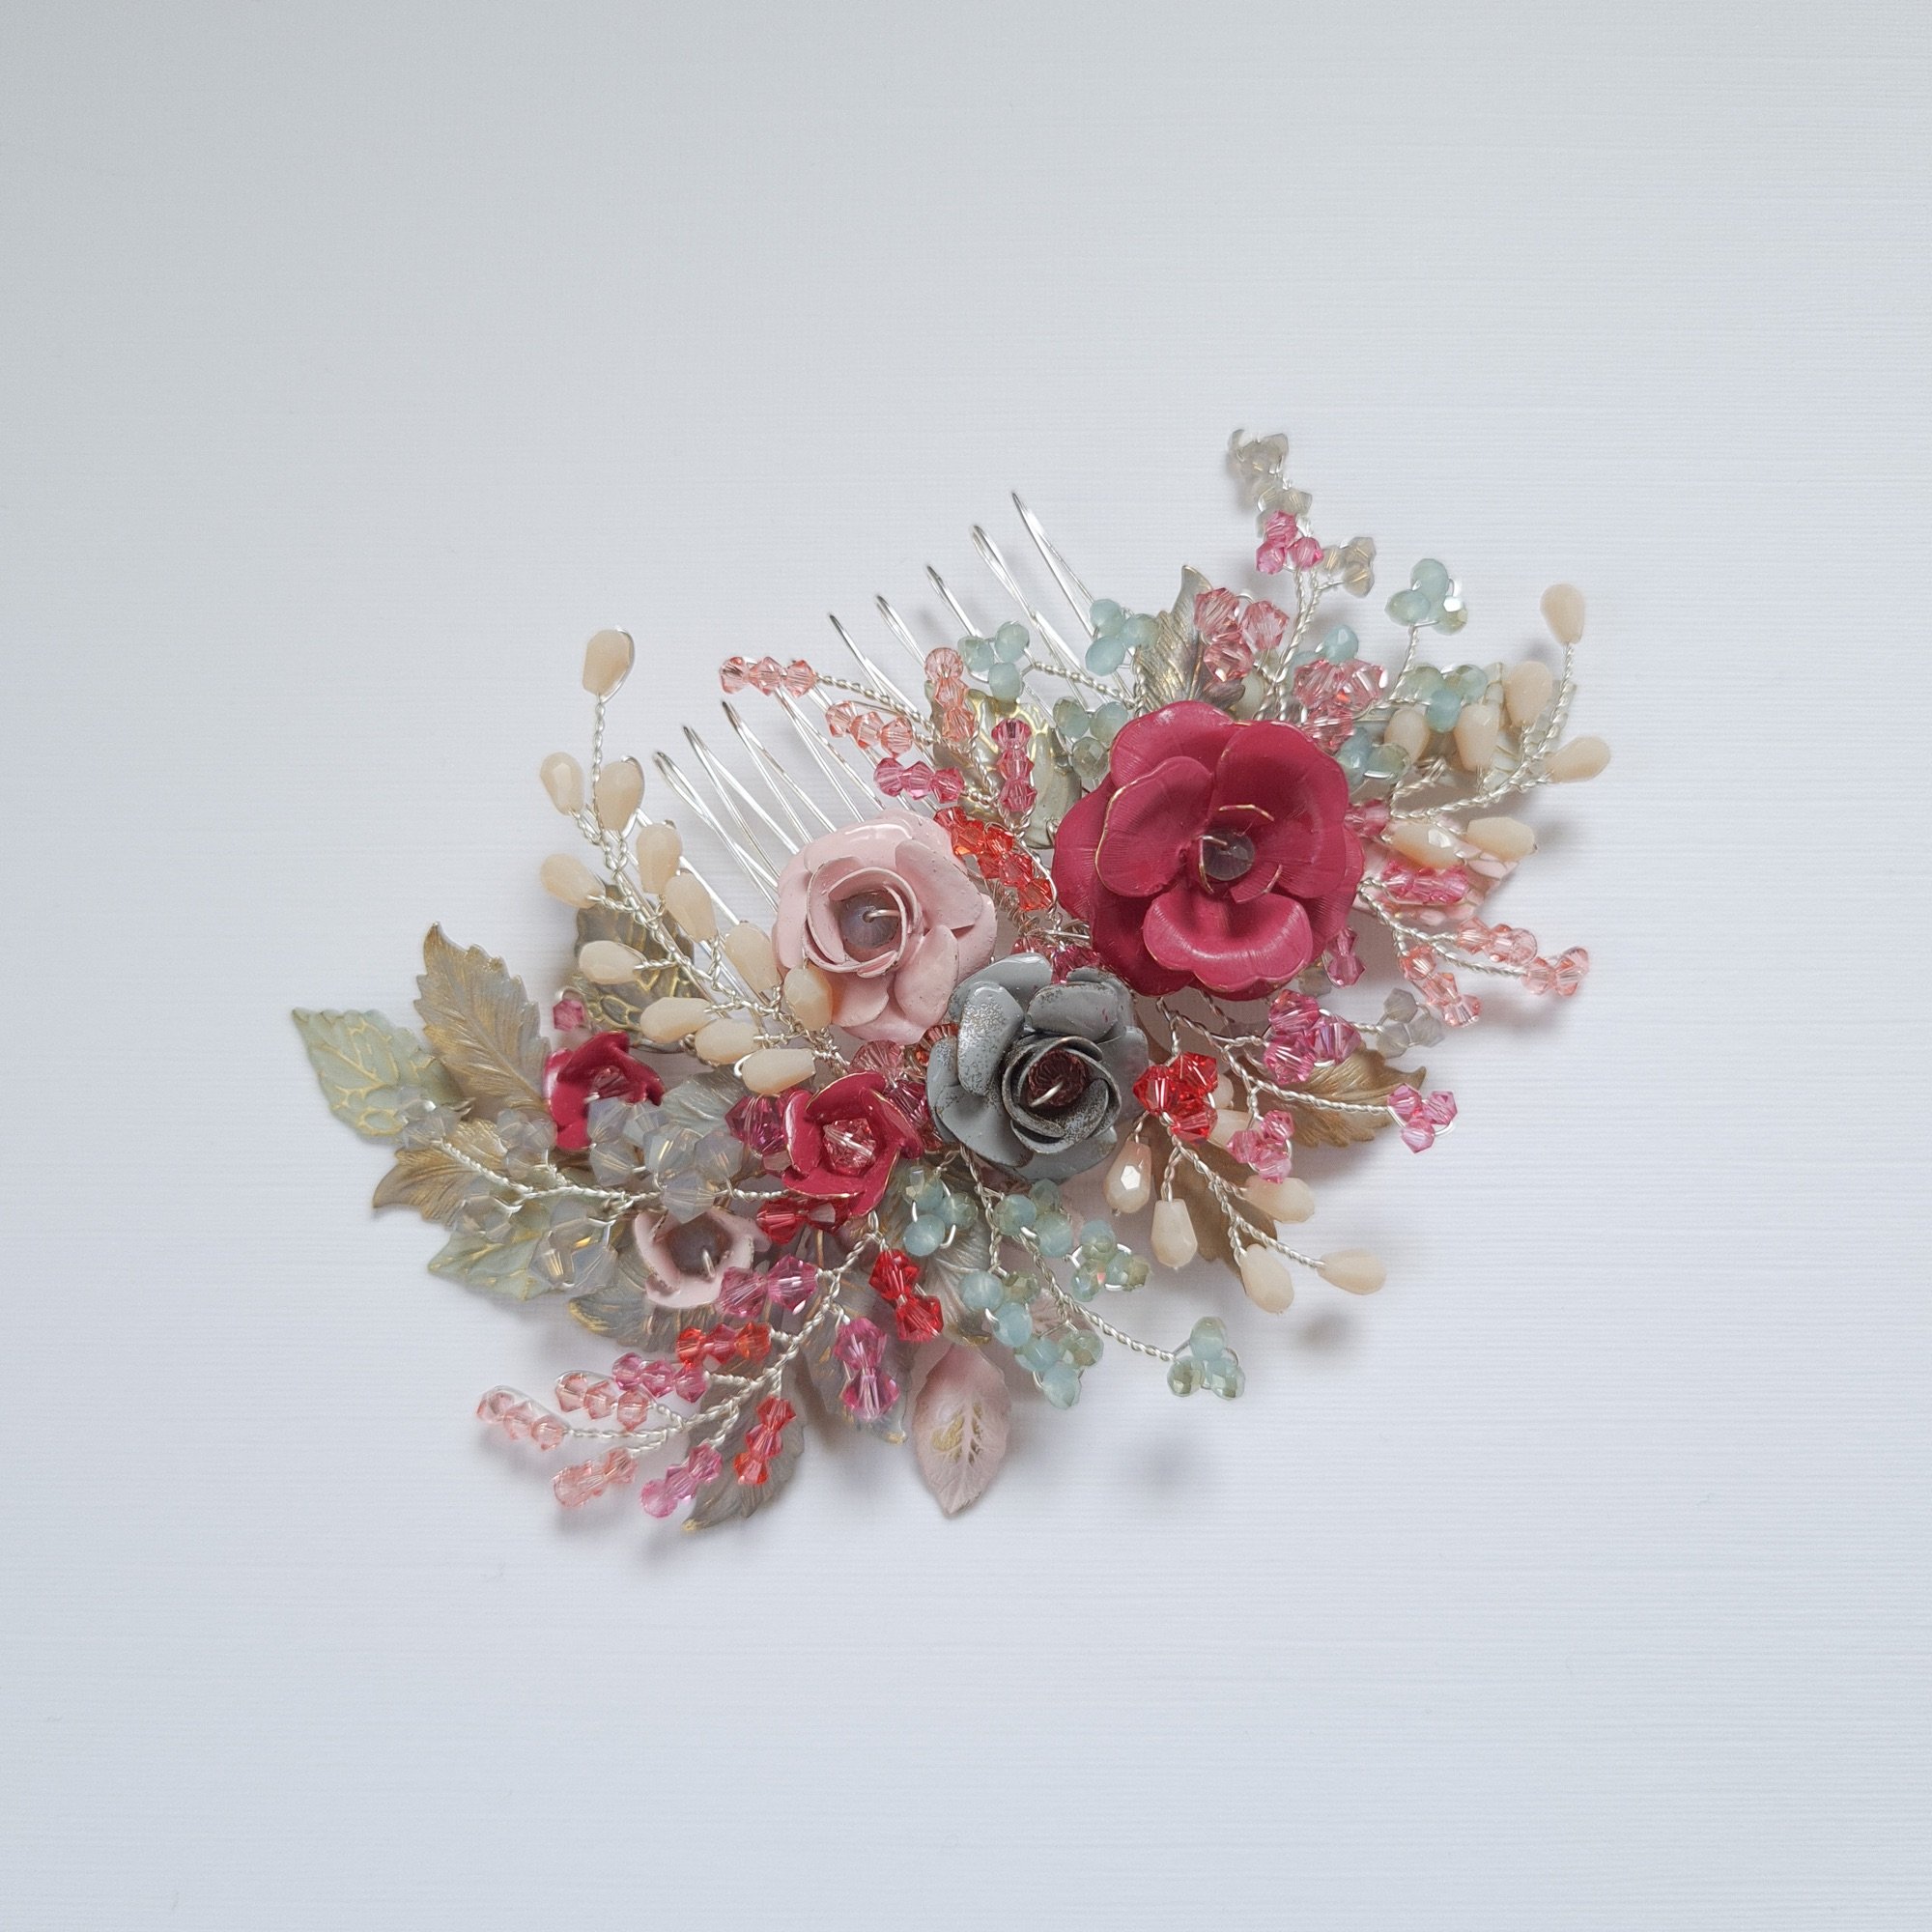 Bespoke floral wedding hair comb in shades of pink grey and coral